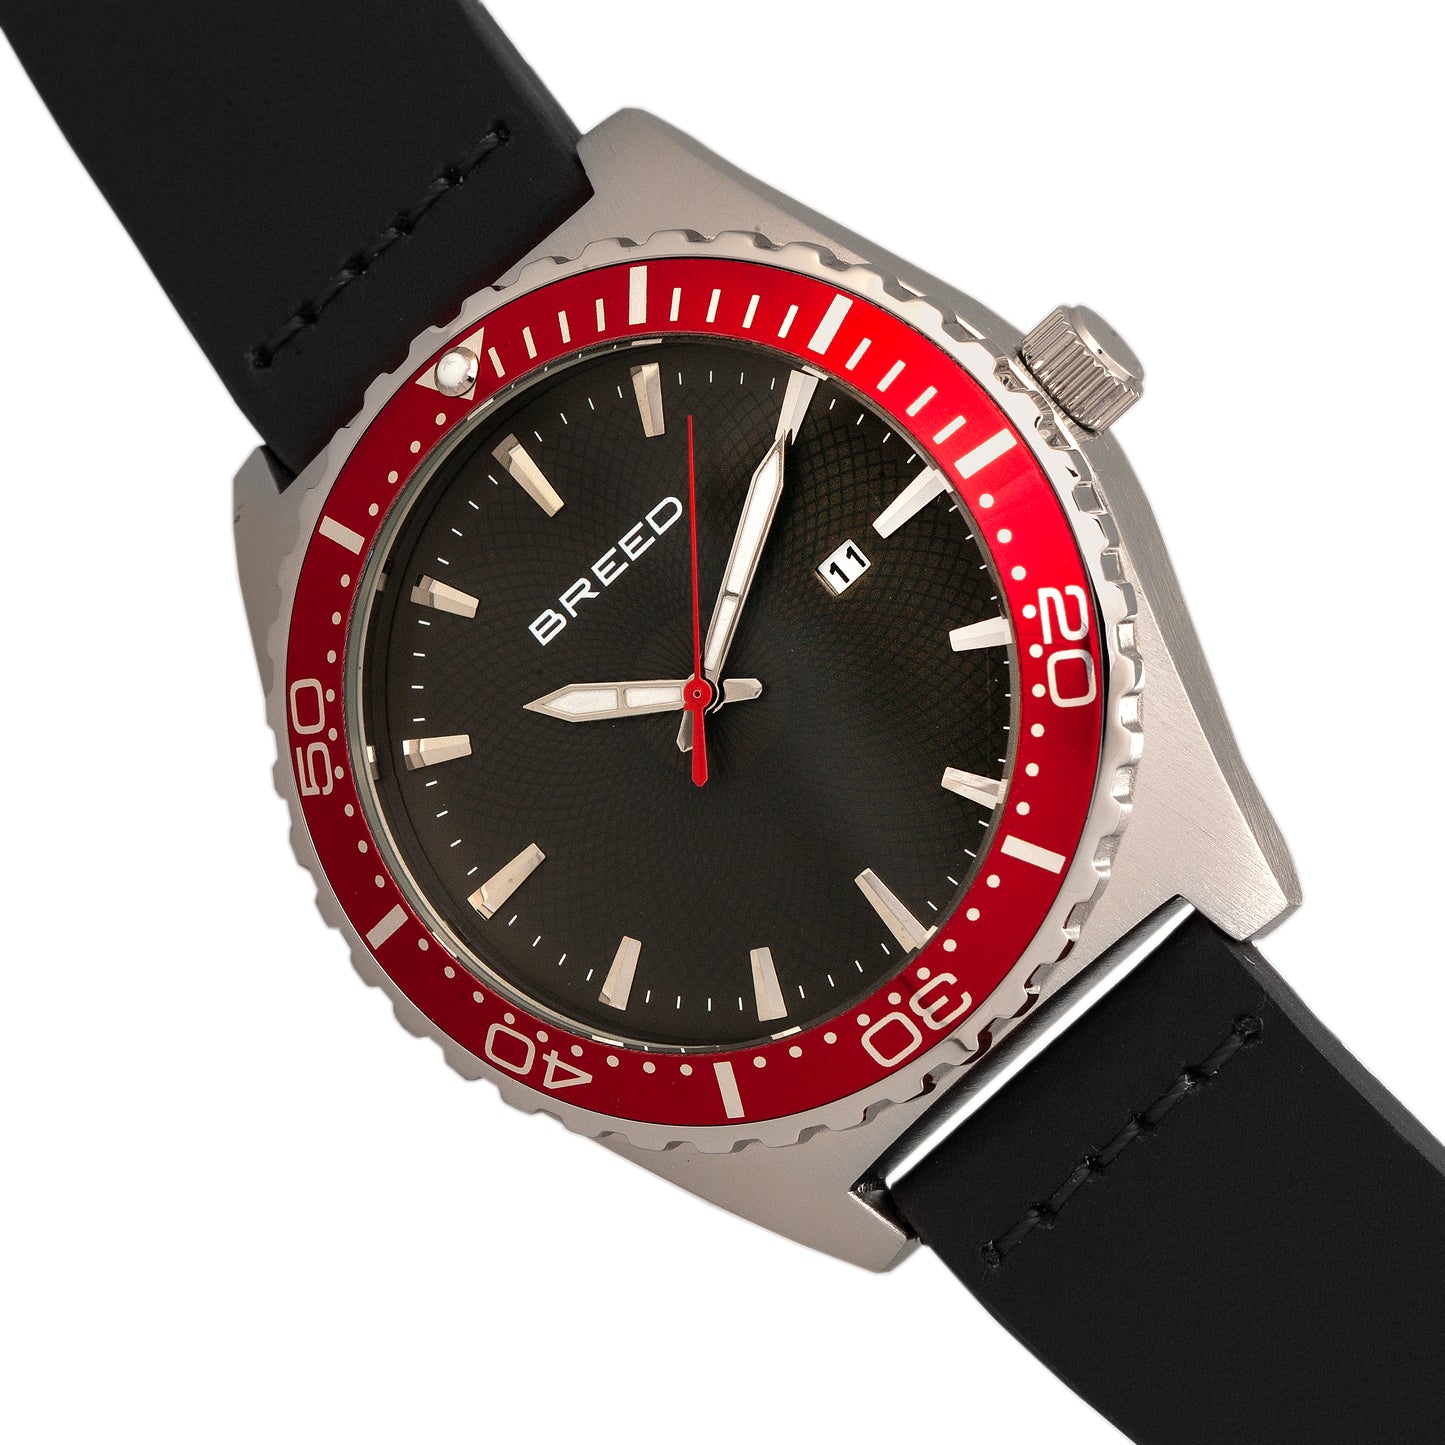 Breed Ranger Leather-Band Watch w/Date - Black/Red - BRD8008